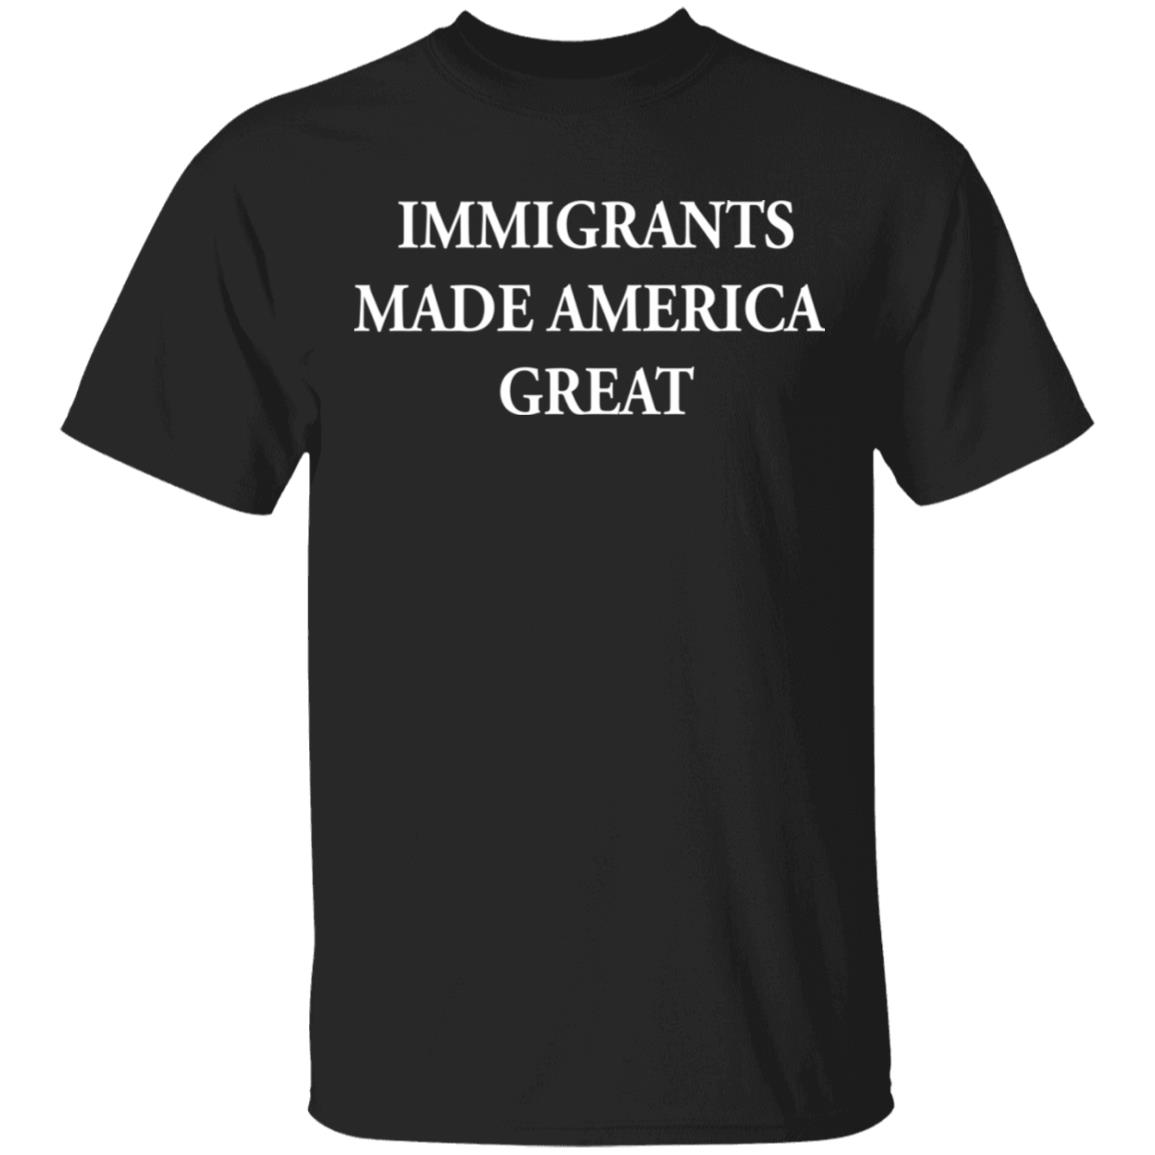 Immigrants made America great shirt